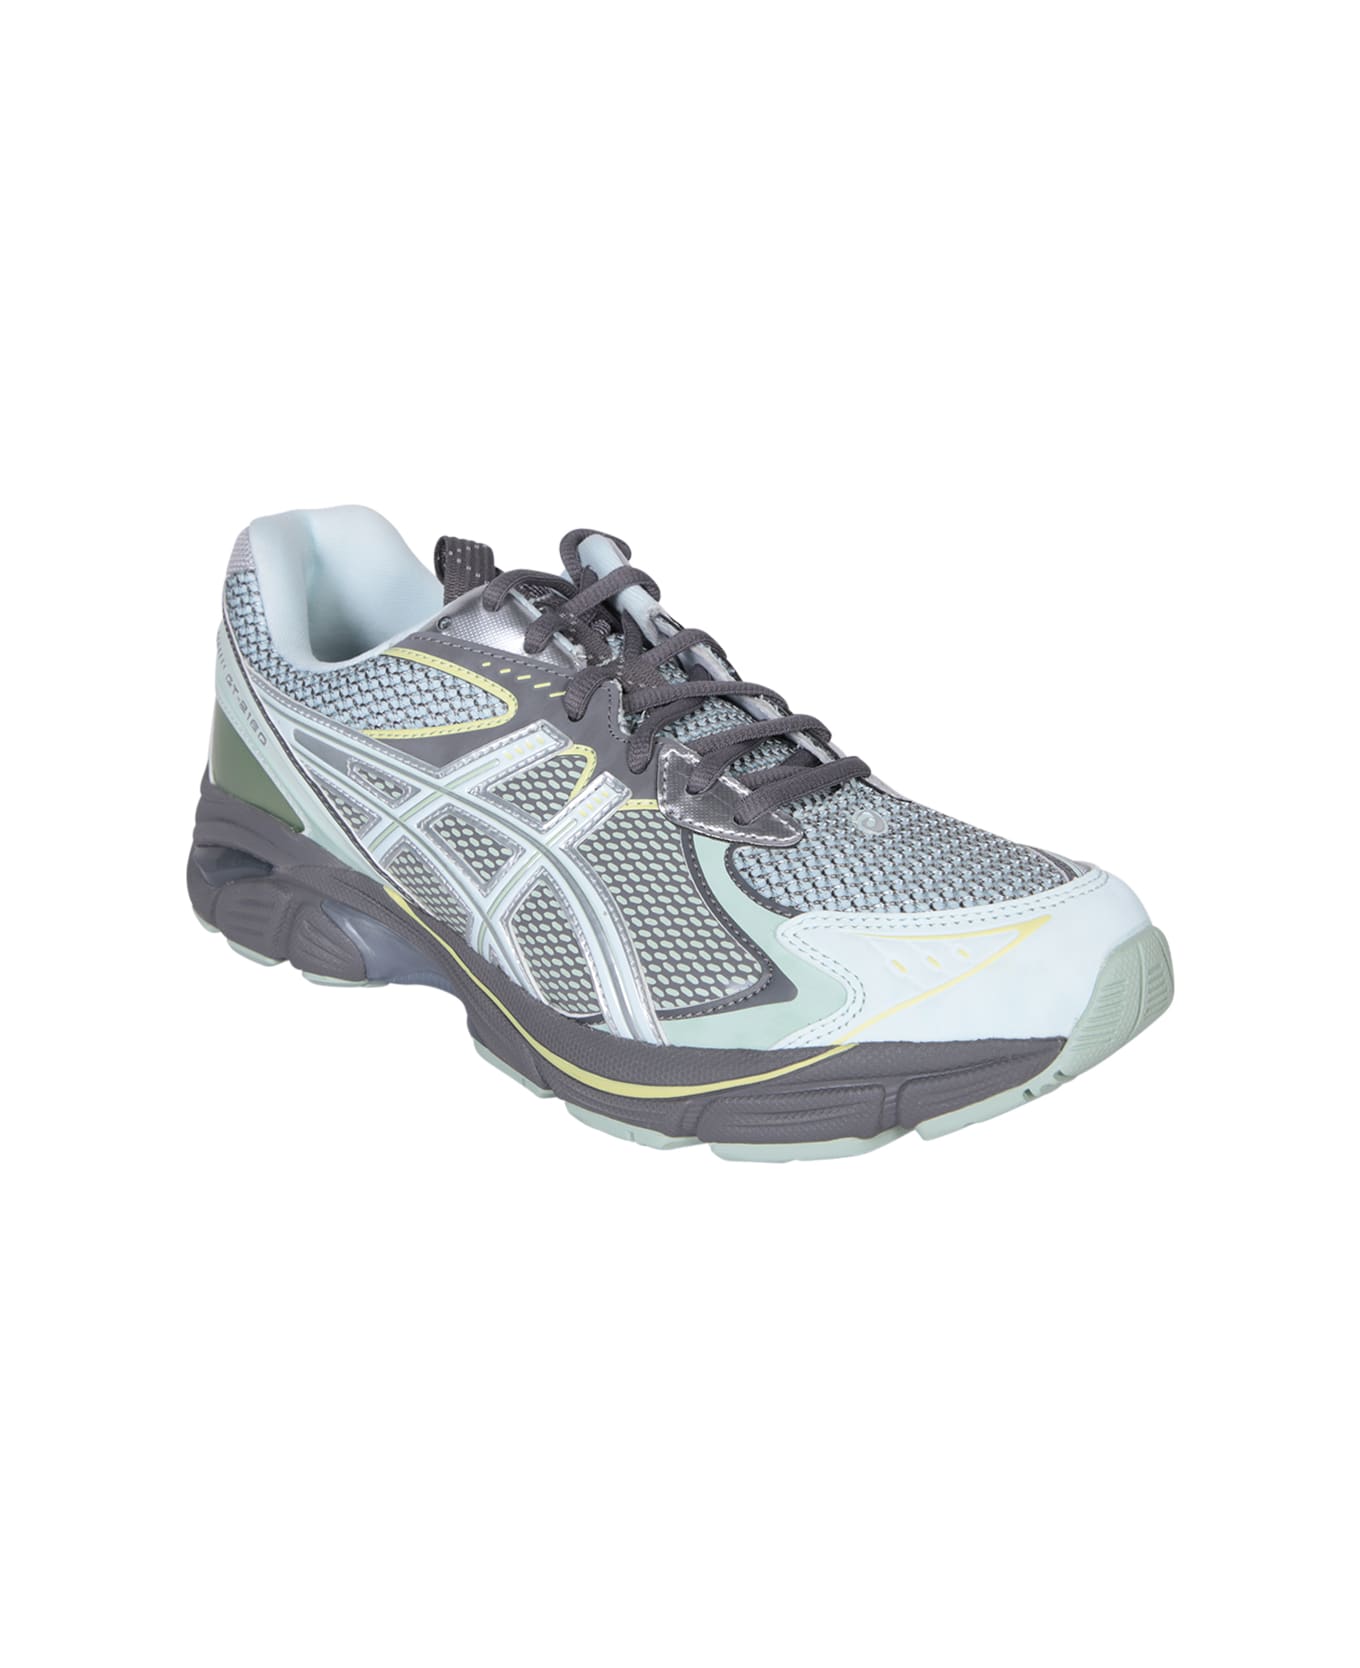 Asics Ub6s Gt2160 Grey And Light Blue Sneakers - Grey スニーカー